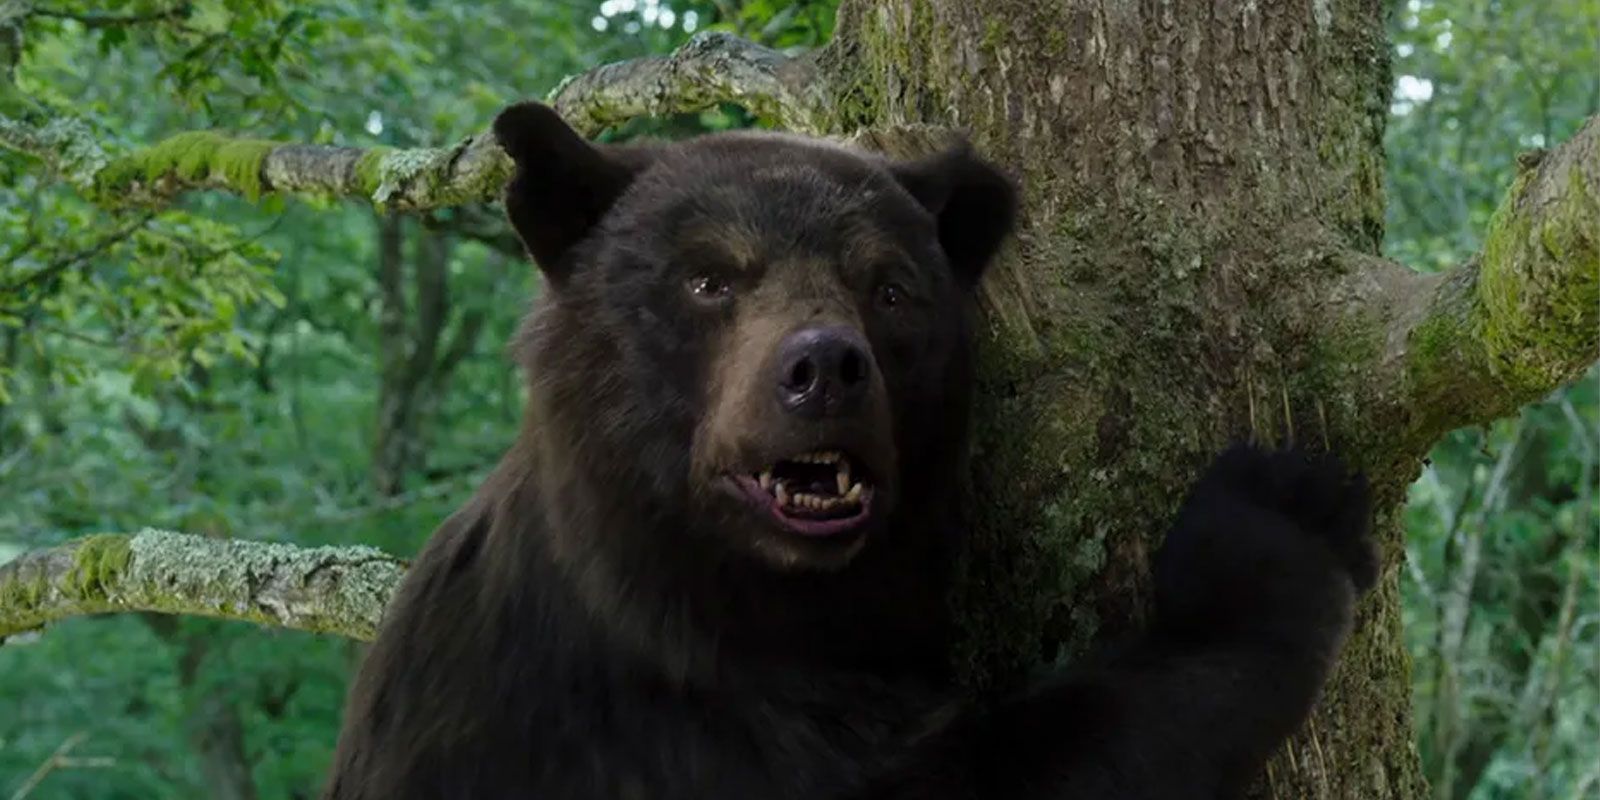 The black bear from Cocaine Bear sitting in a tree.